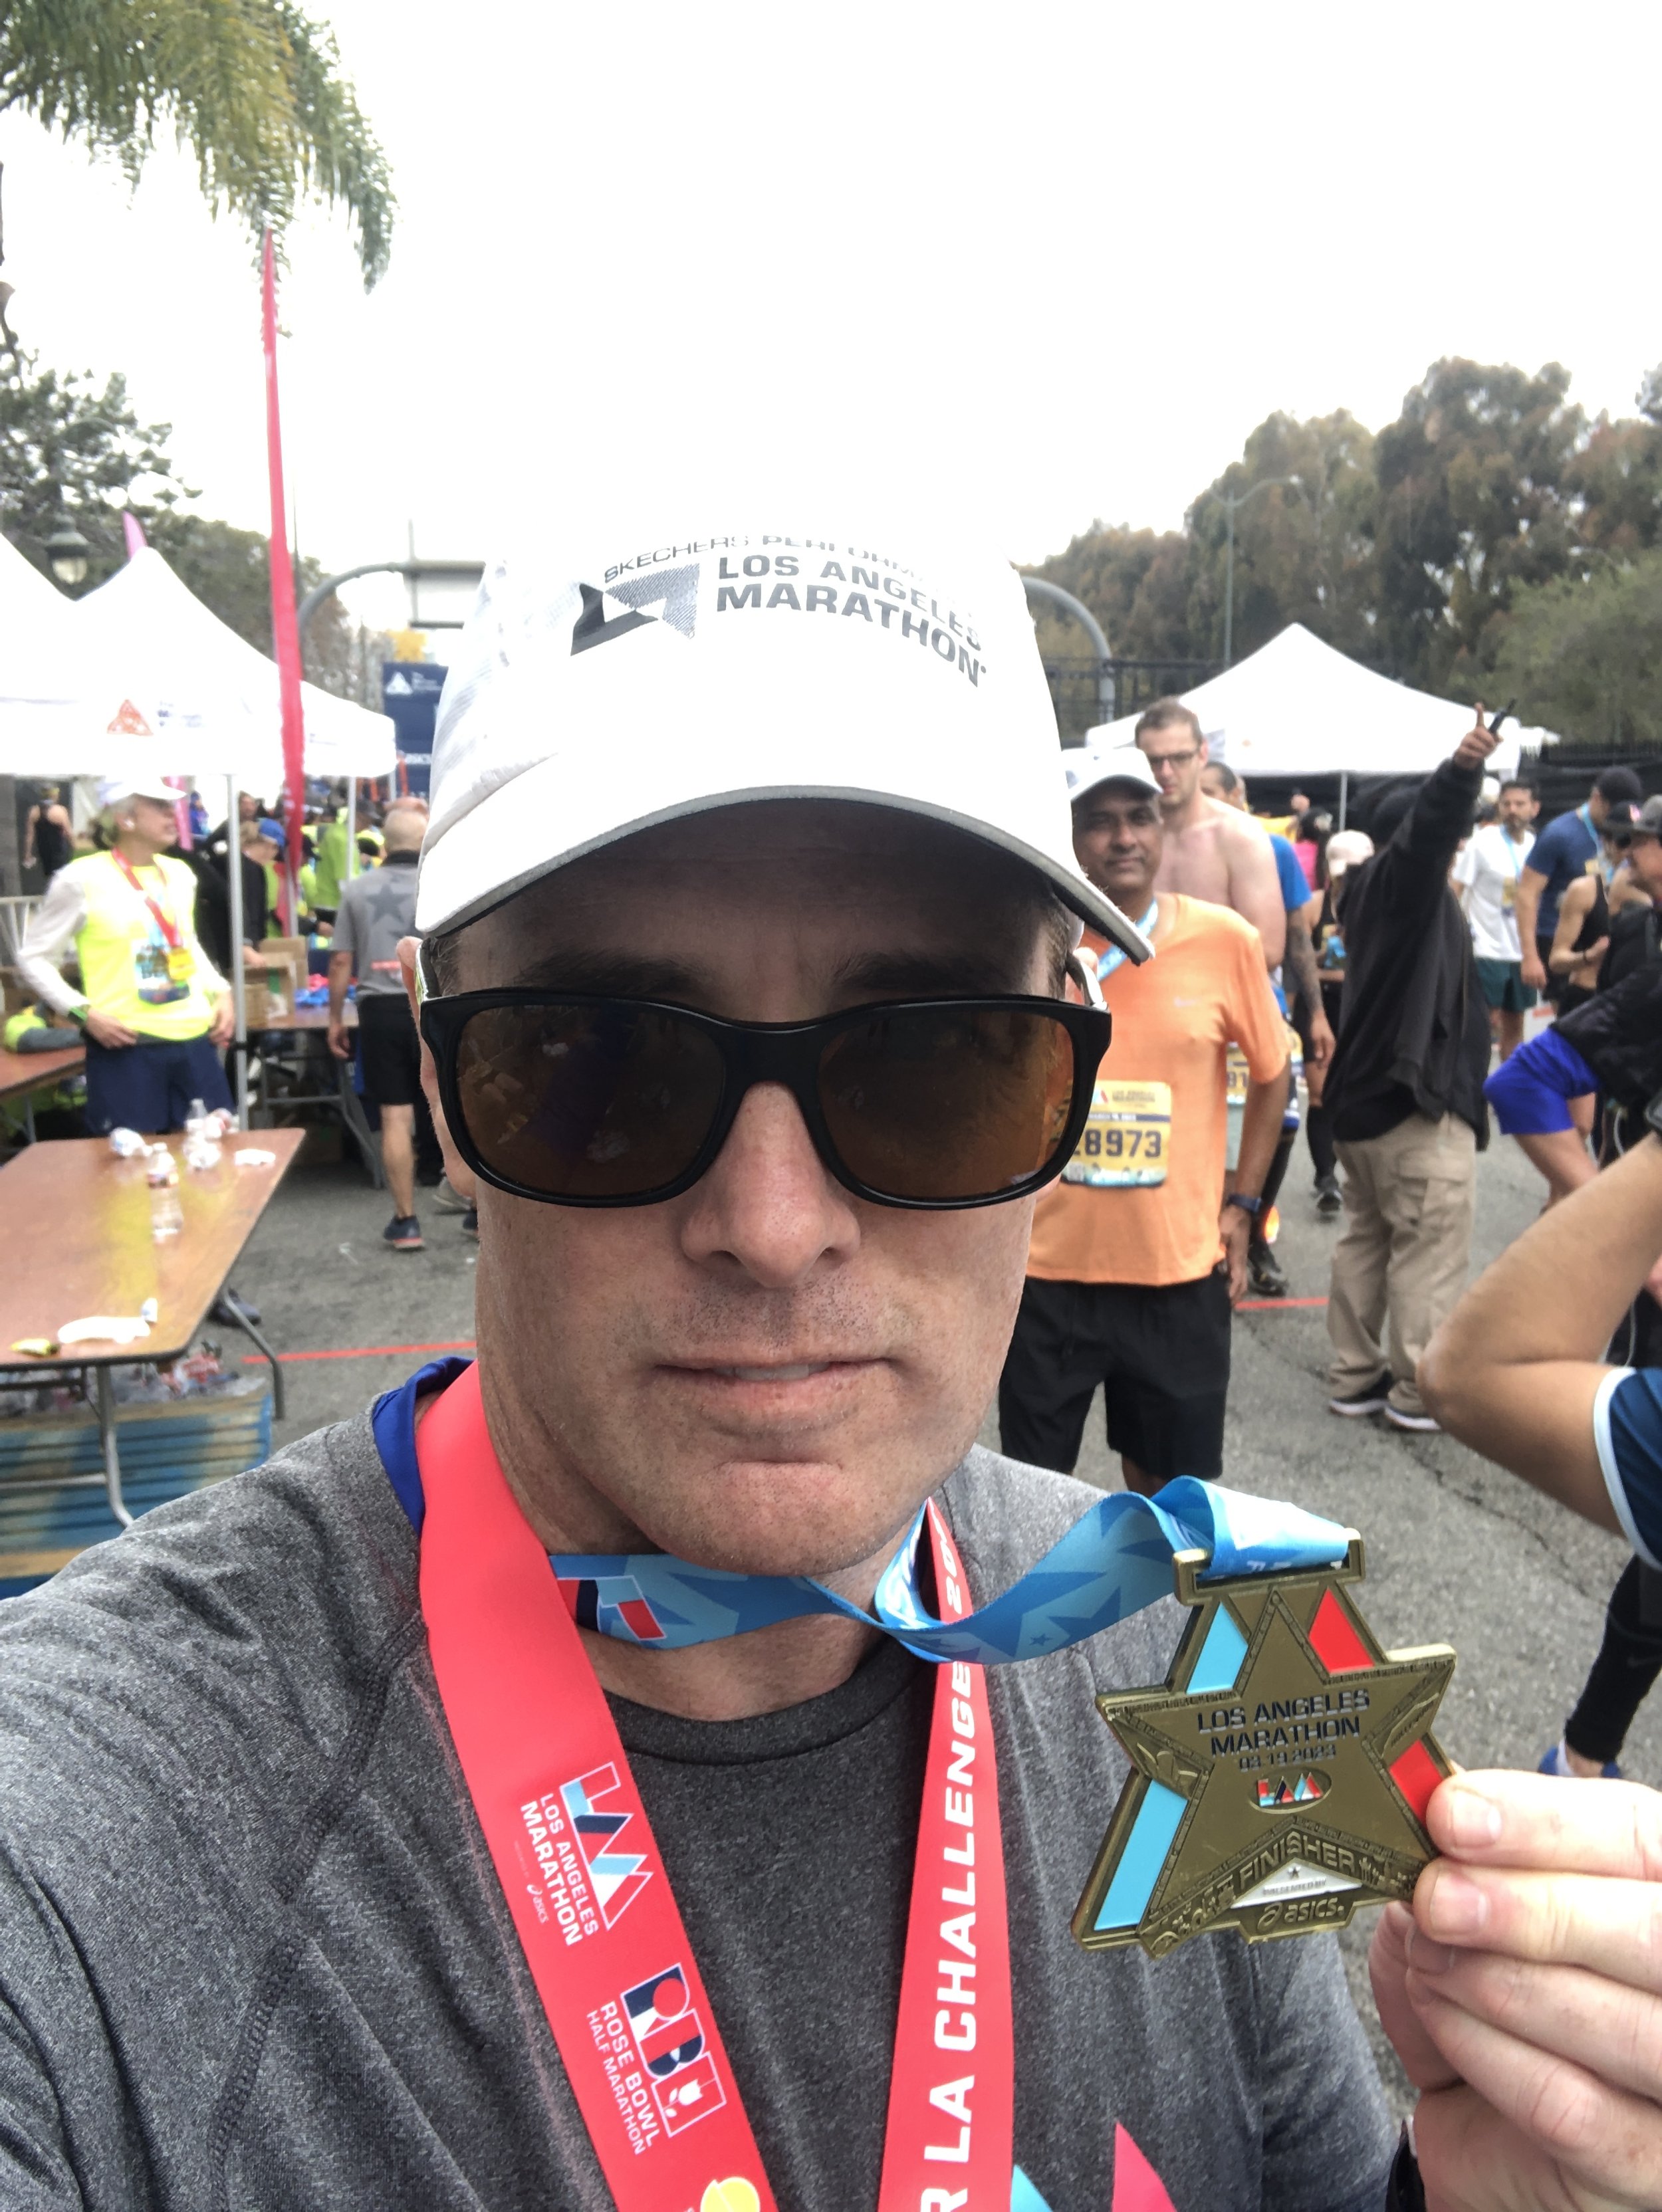 2 Medals! One for finishing the LA Marathon and another because I completed a series of 3 races called Conquer LA.